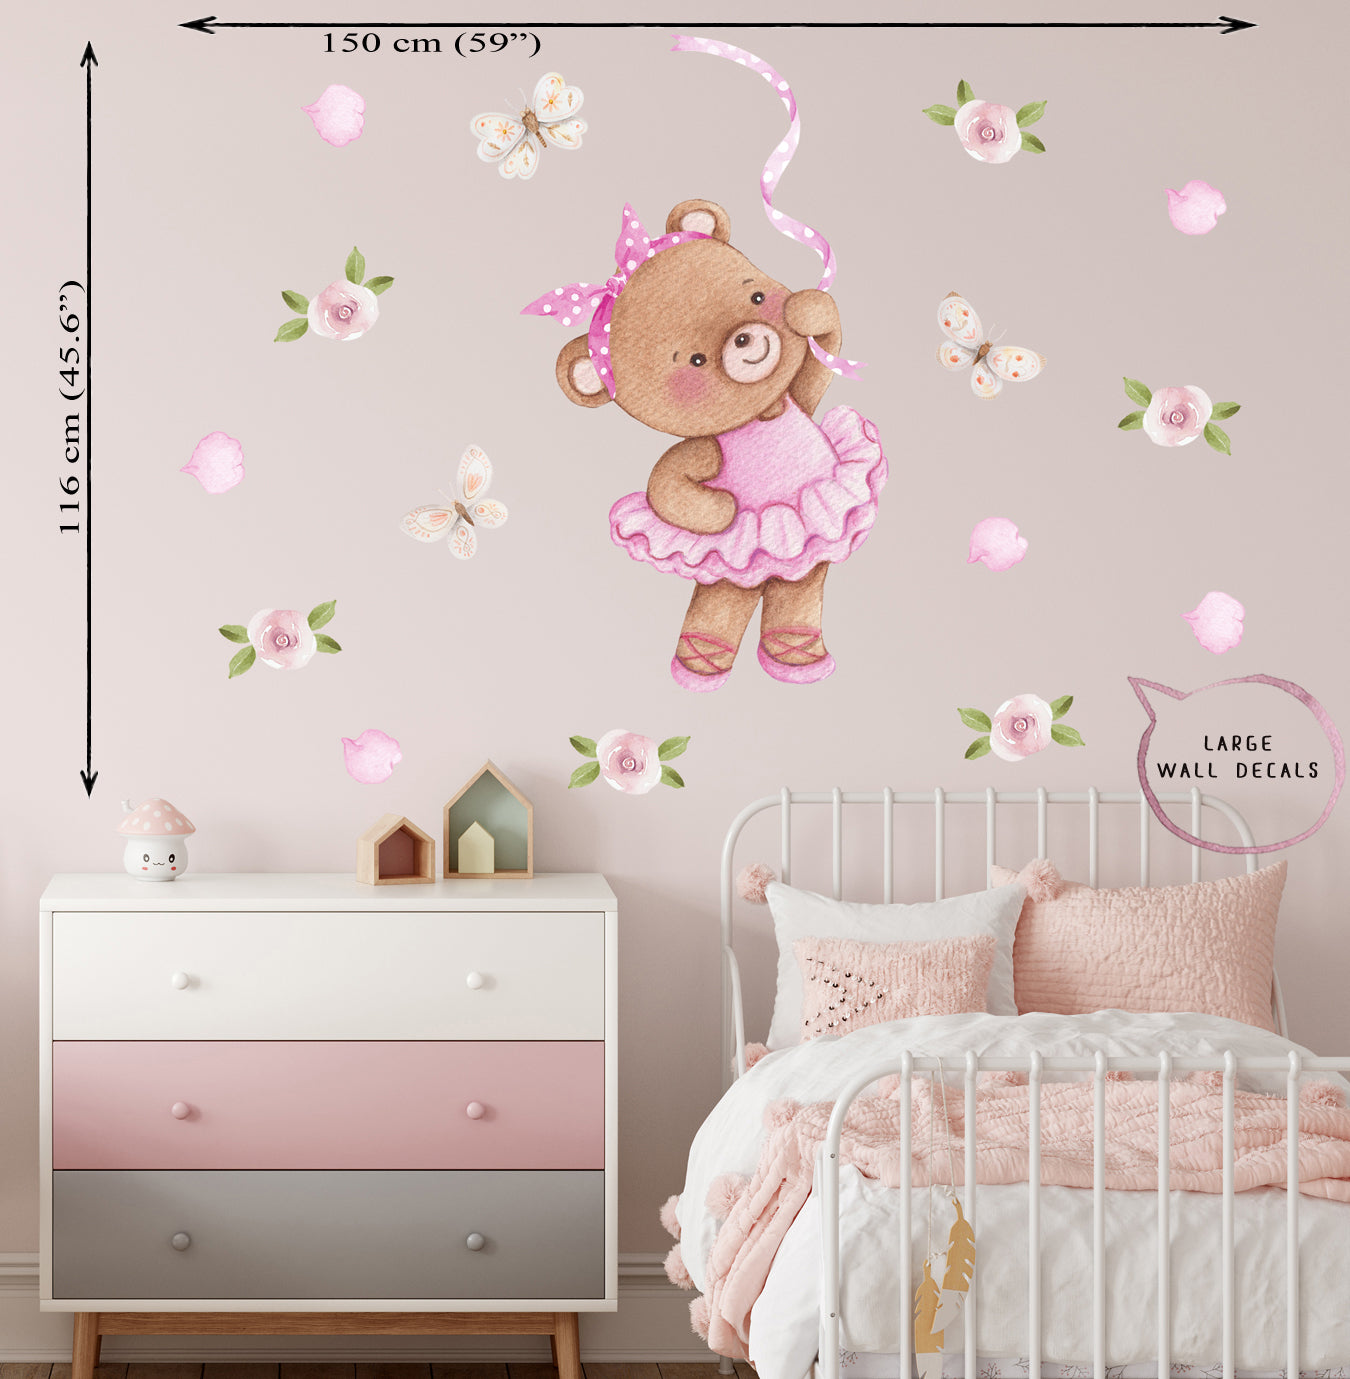 Teddy bear ballerina. Large wall decals for children's room. Roses, flowers and   butterflies.